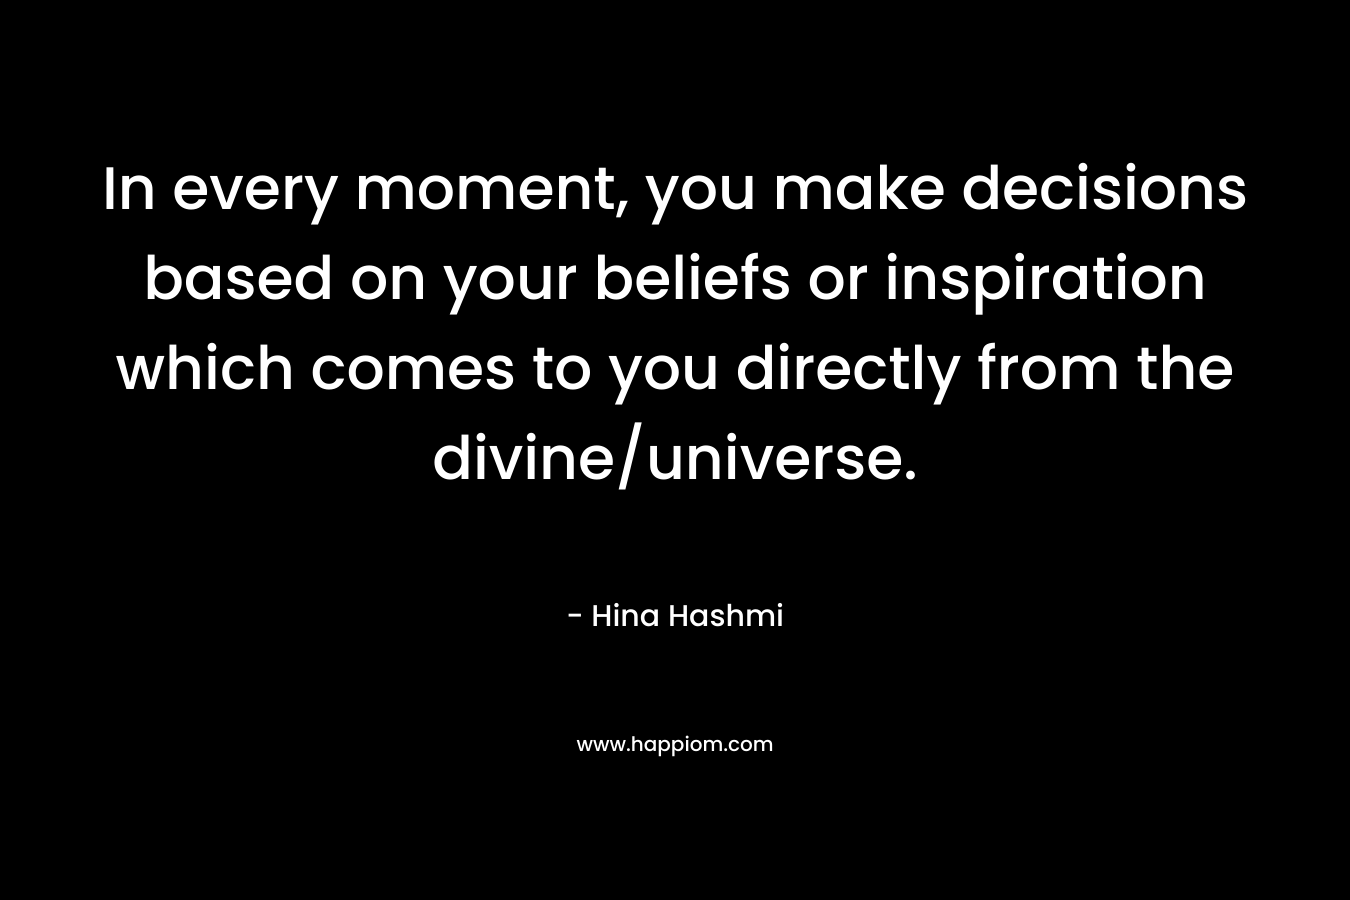 In every moment, you make decisions based on your beliefs or inspiration which comes to you directly from the divine/universe.